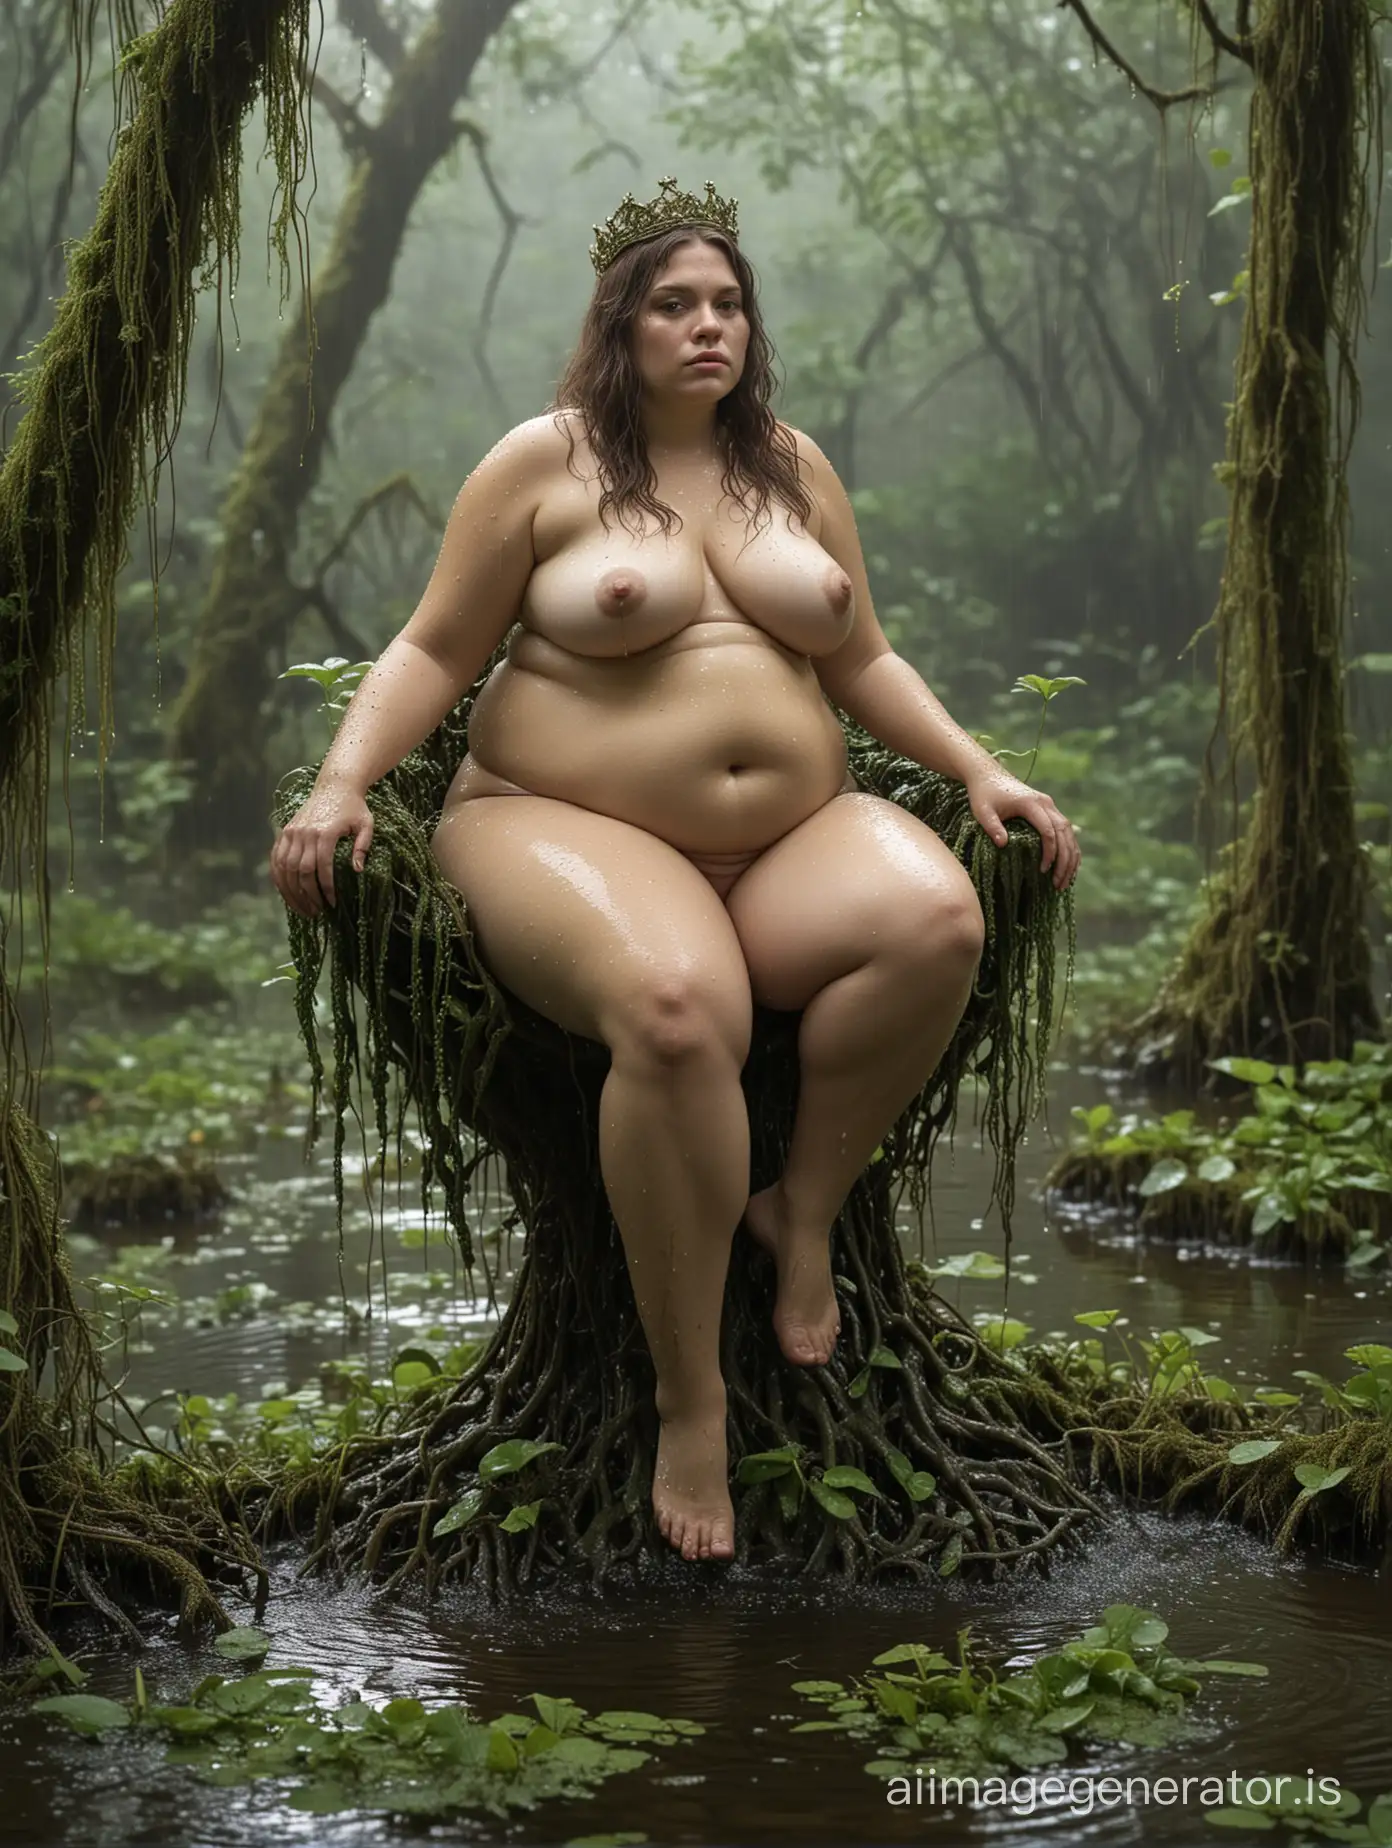 the fat young woman, frog queen, sitting scantily clad on her large vine throne in the swamp, her legs spread. Frogs all around her. viny hair, glistening wet skin, mossy, dirty, heavy rain